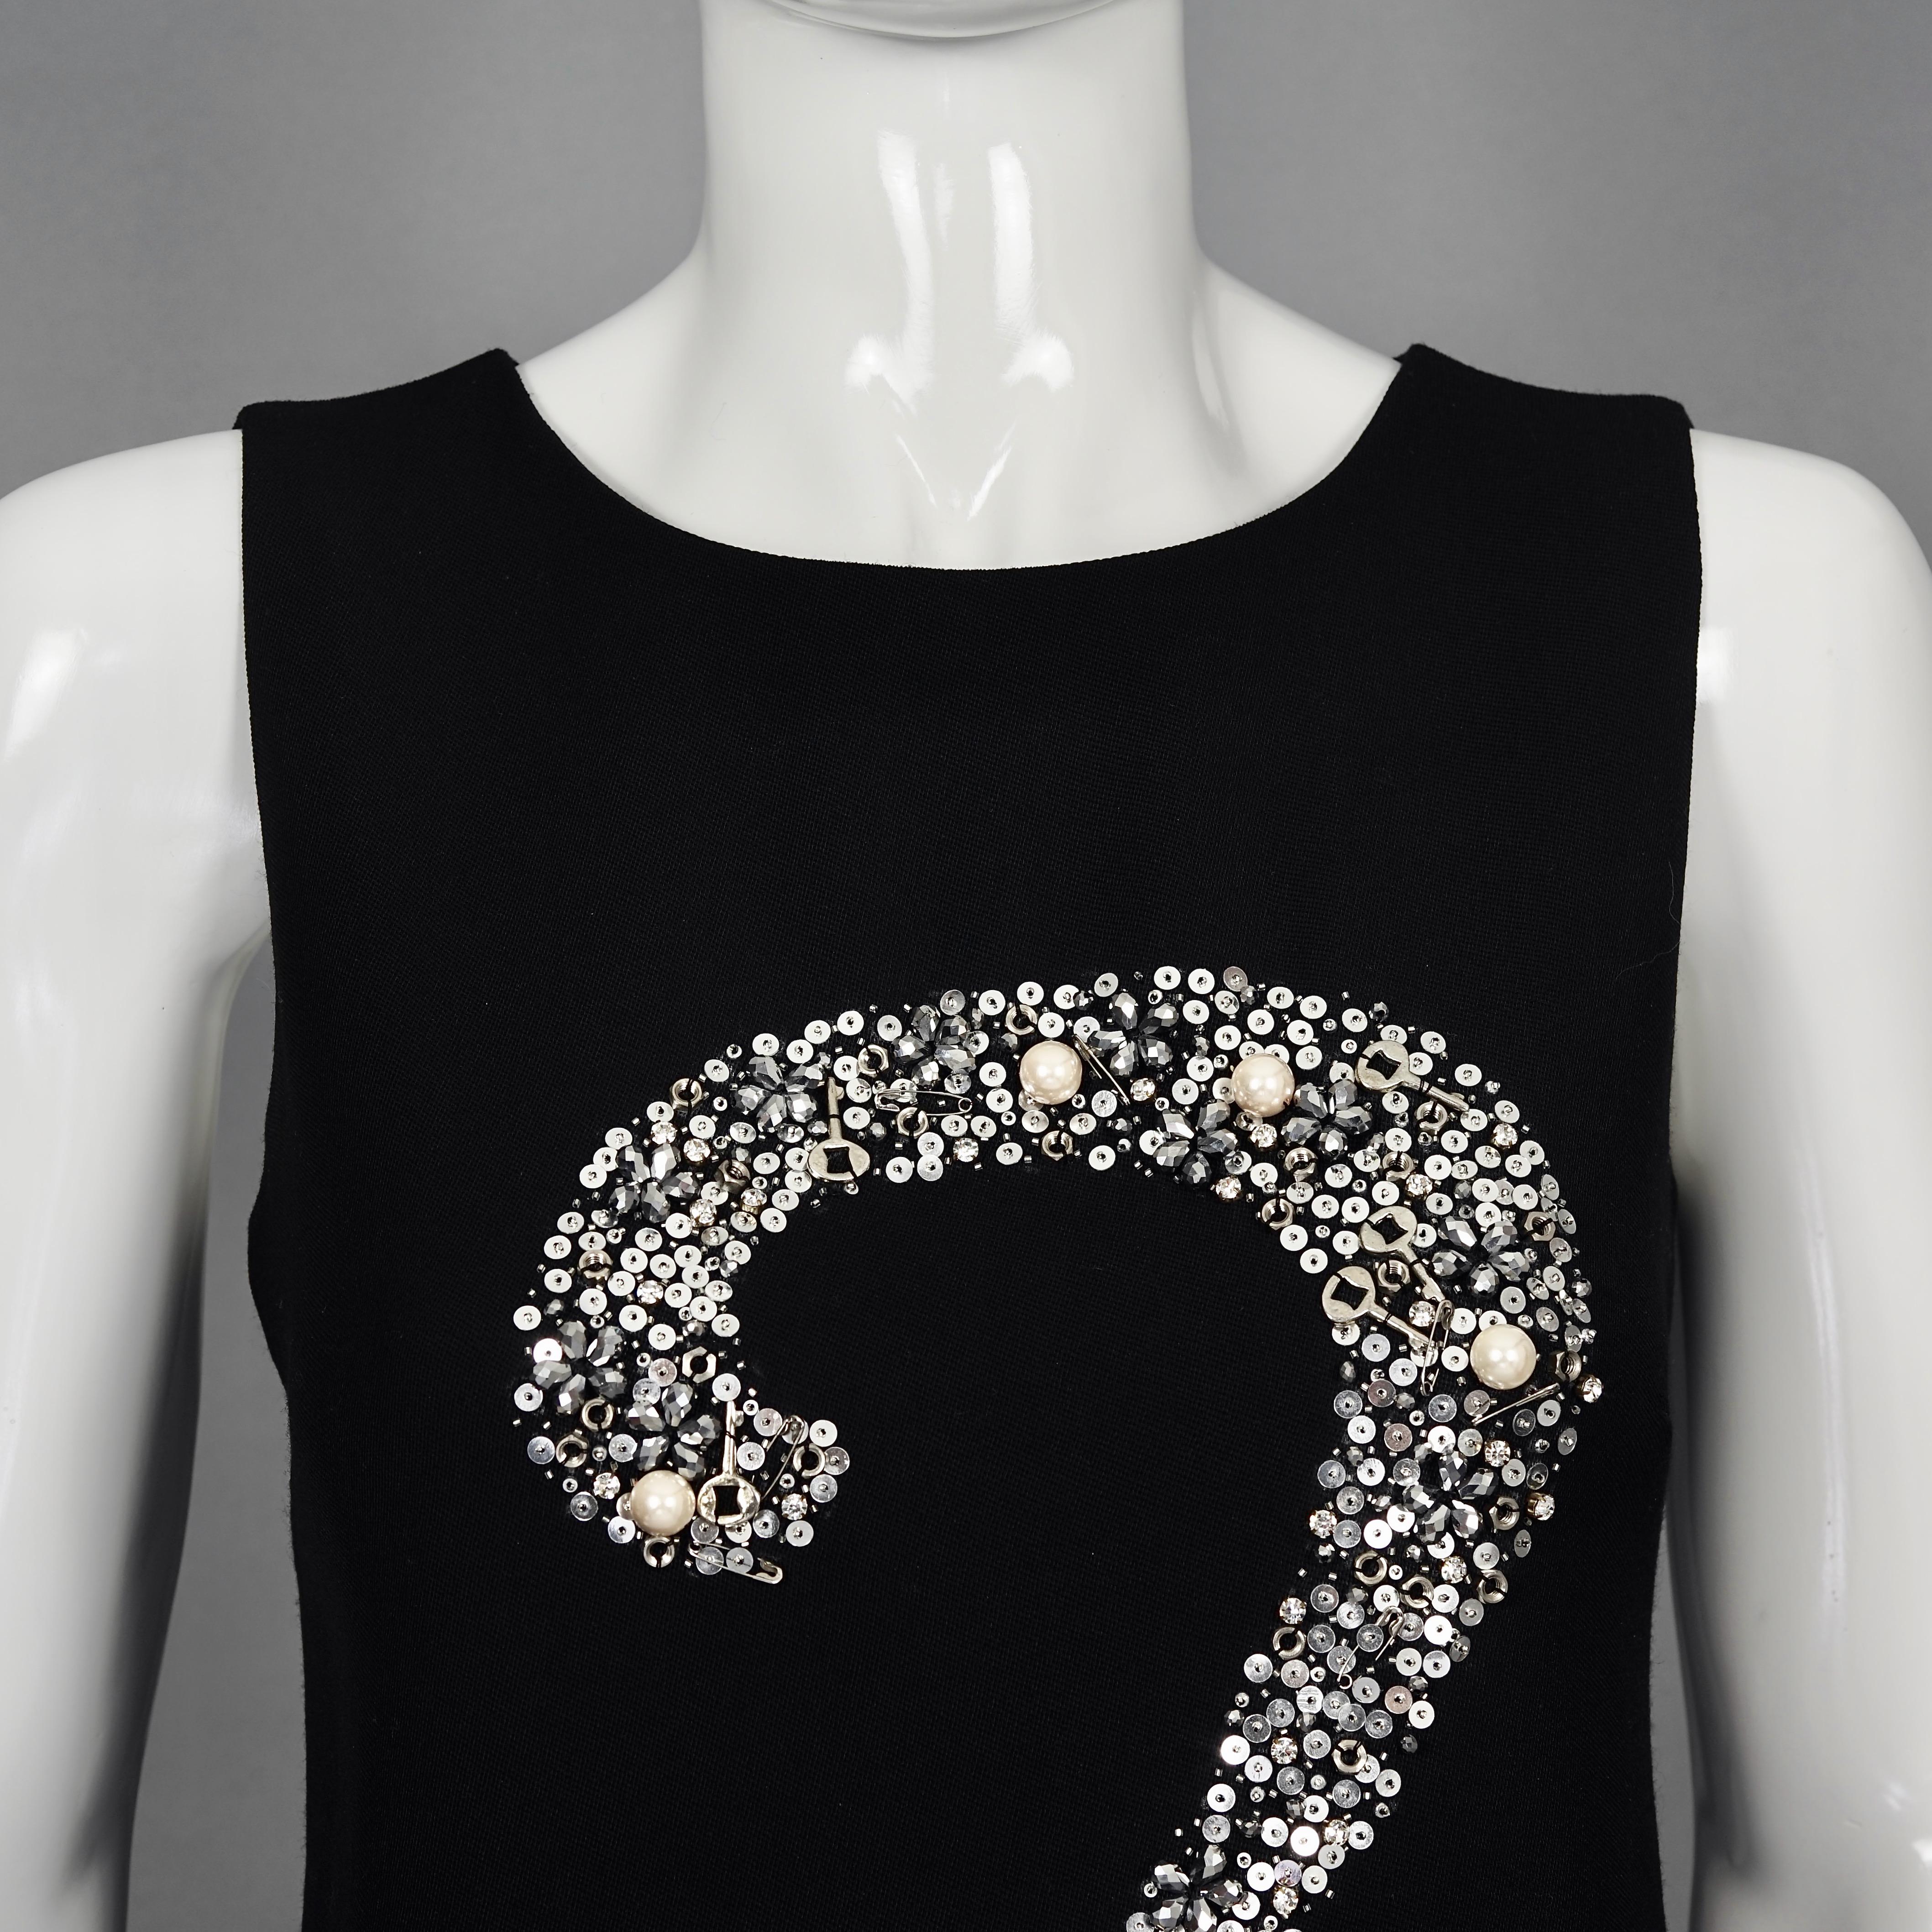 Women's Iconic MOSCHINO Question Mark Embellished Dress